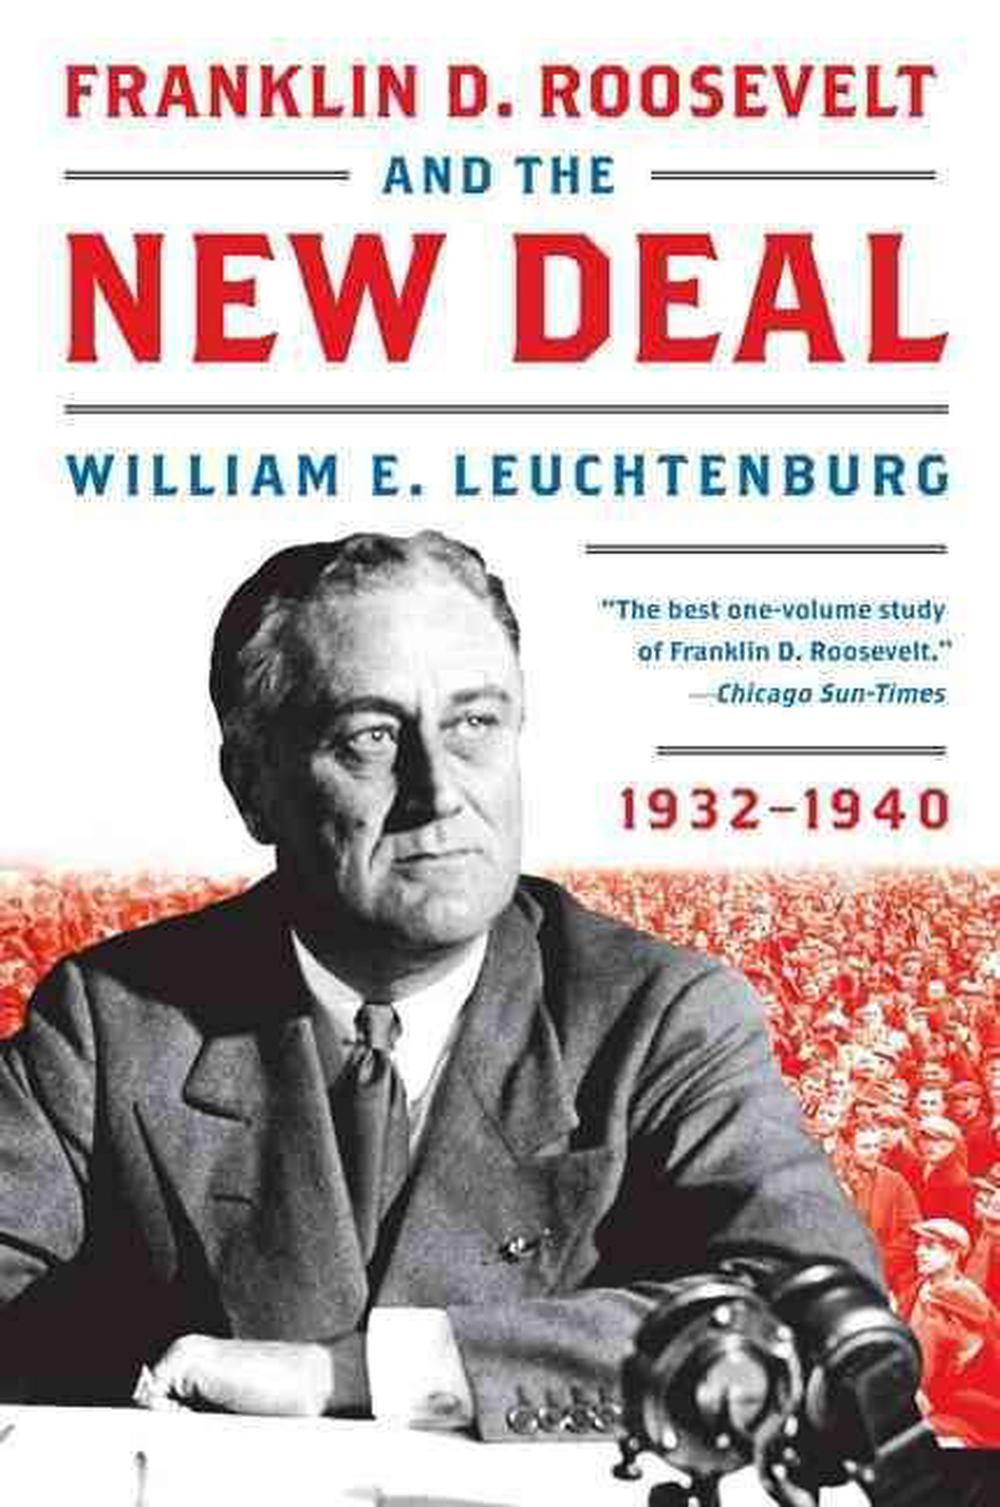 the new deal roosevelt essay